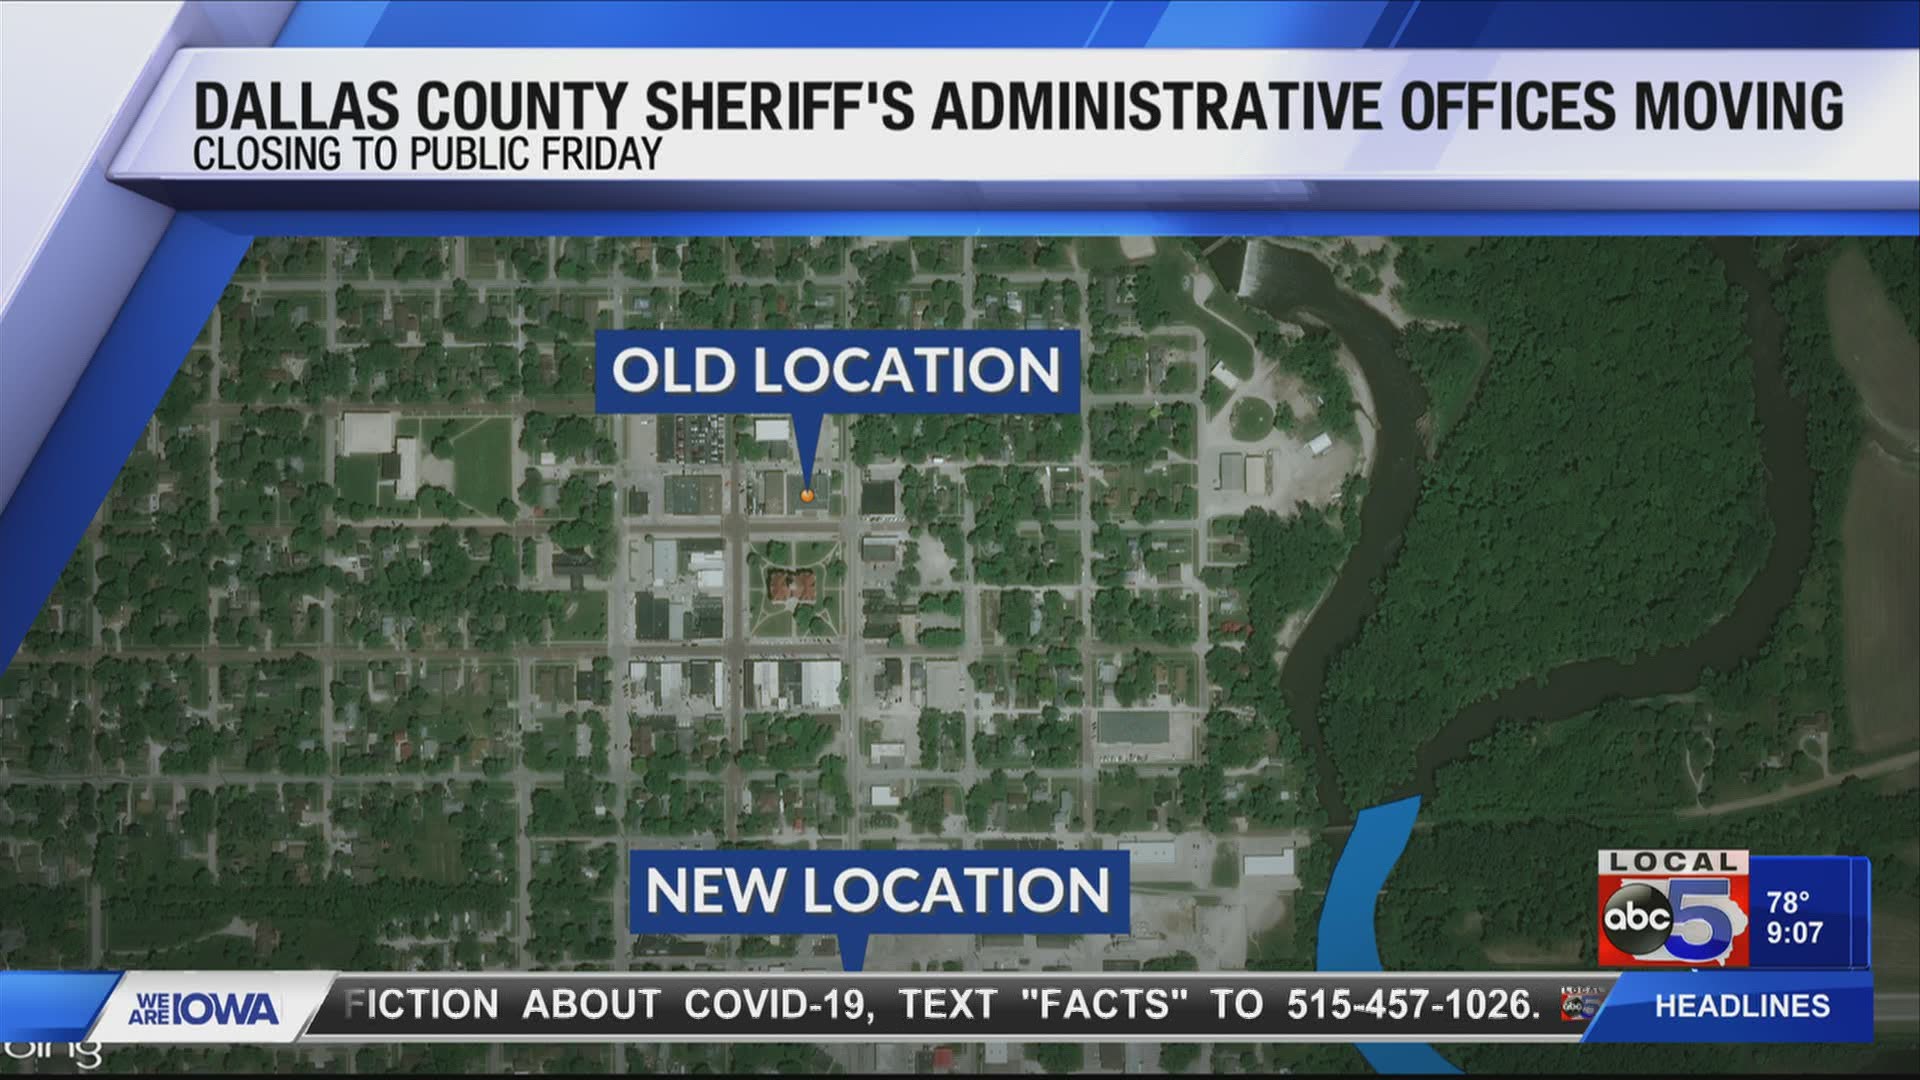 The Dallas County Sheriff's administrative offices are moving crosstown in Adel.